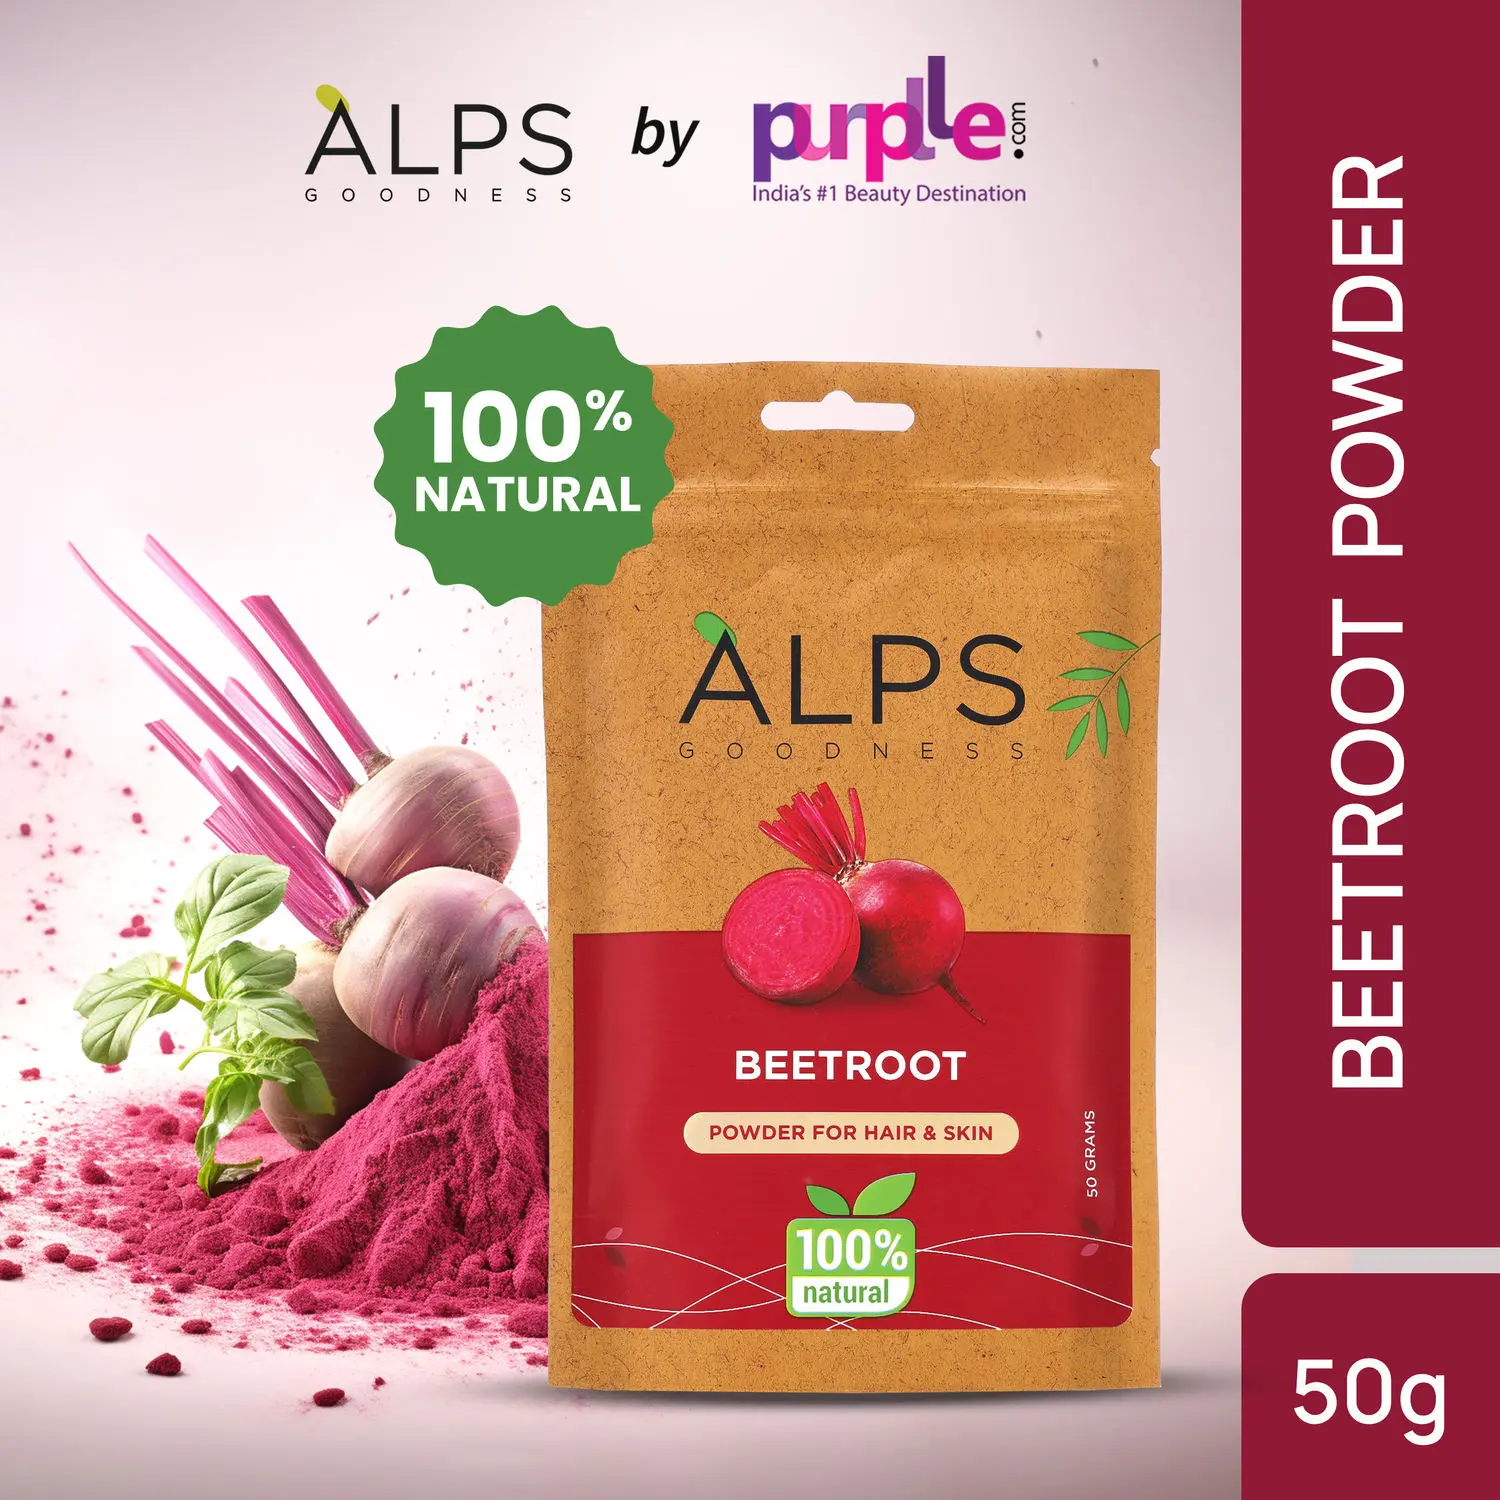 Alps Goodness Powder - Beetroot (50 g) | 100% Natural Powder | No Chemicals, No Preservatives, No Pesticides | Hair Mask or Face Mask | Nourishes hair follicles | Face Pack for brightening skin | Hair Spa